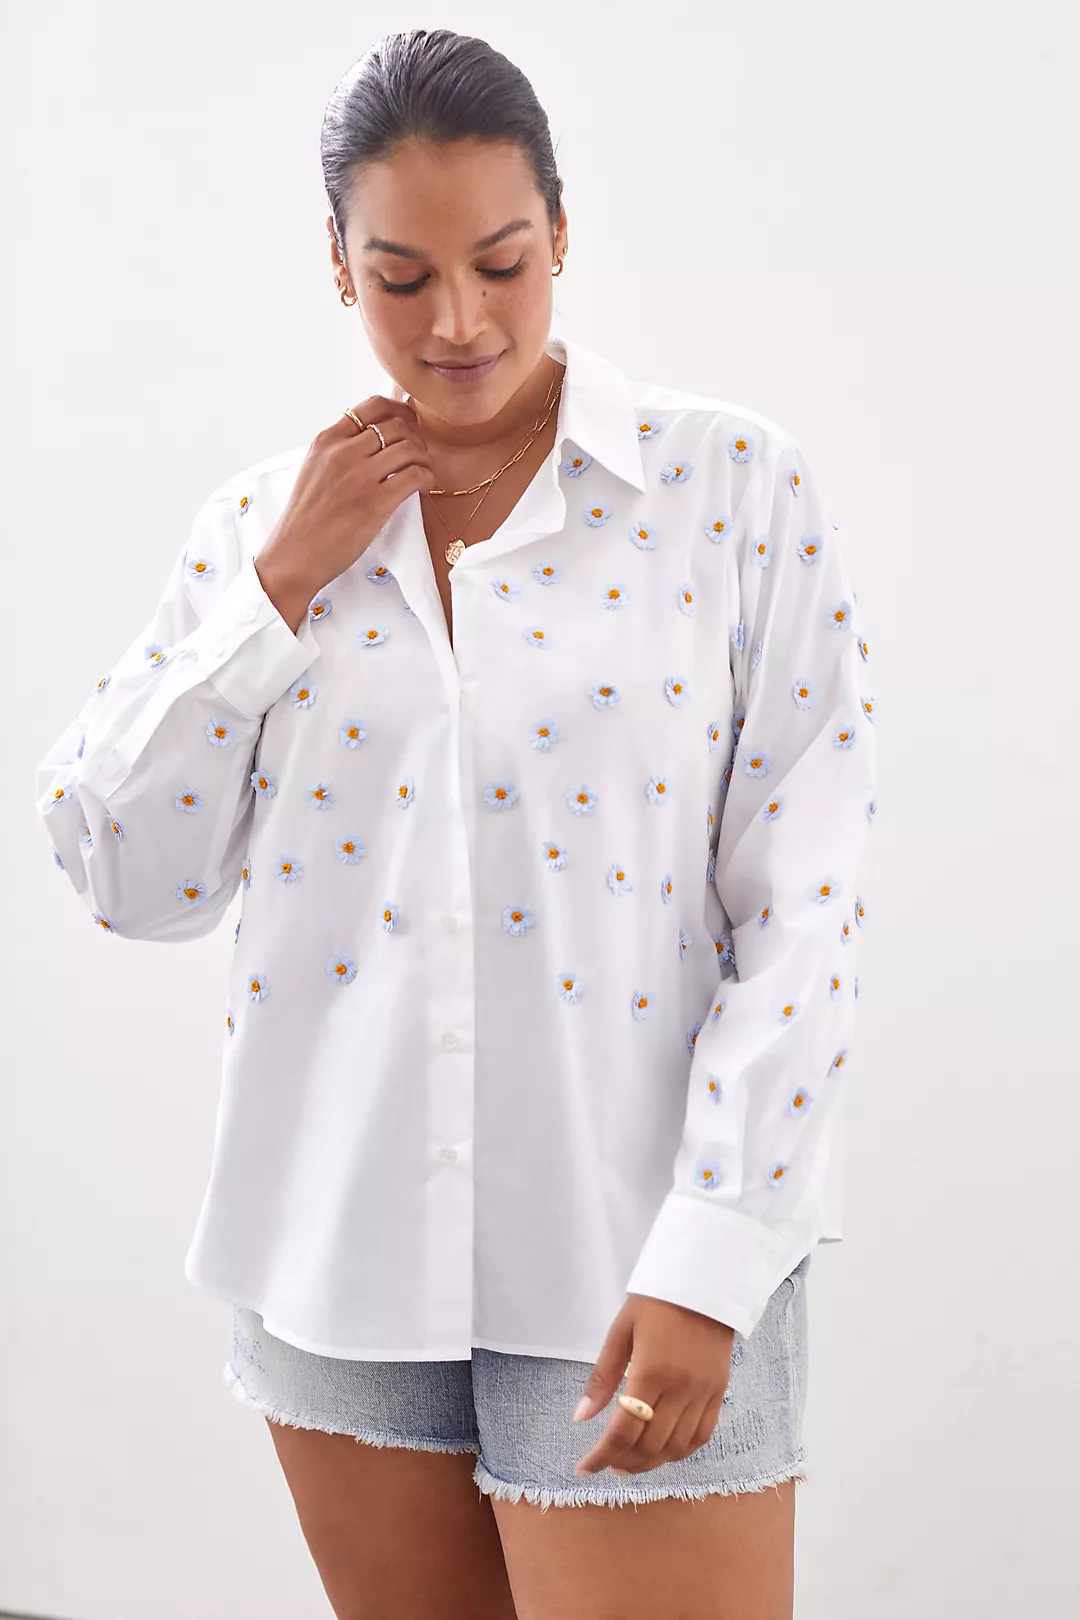 Button-Up Shirts For Busty Girls, Large Chests Cup Size